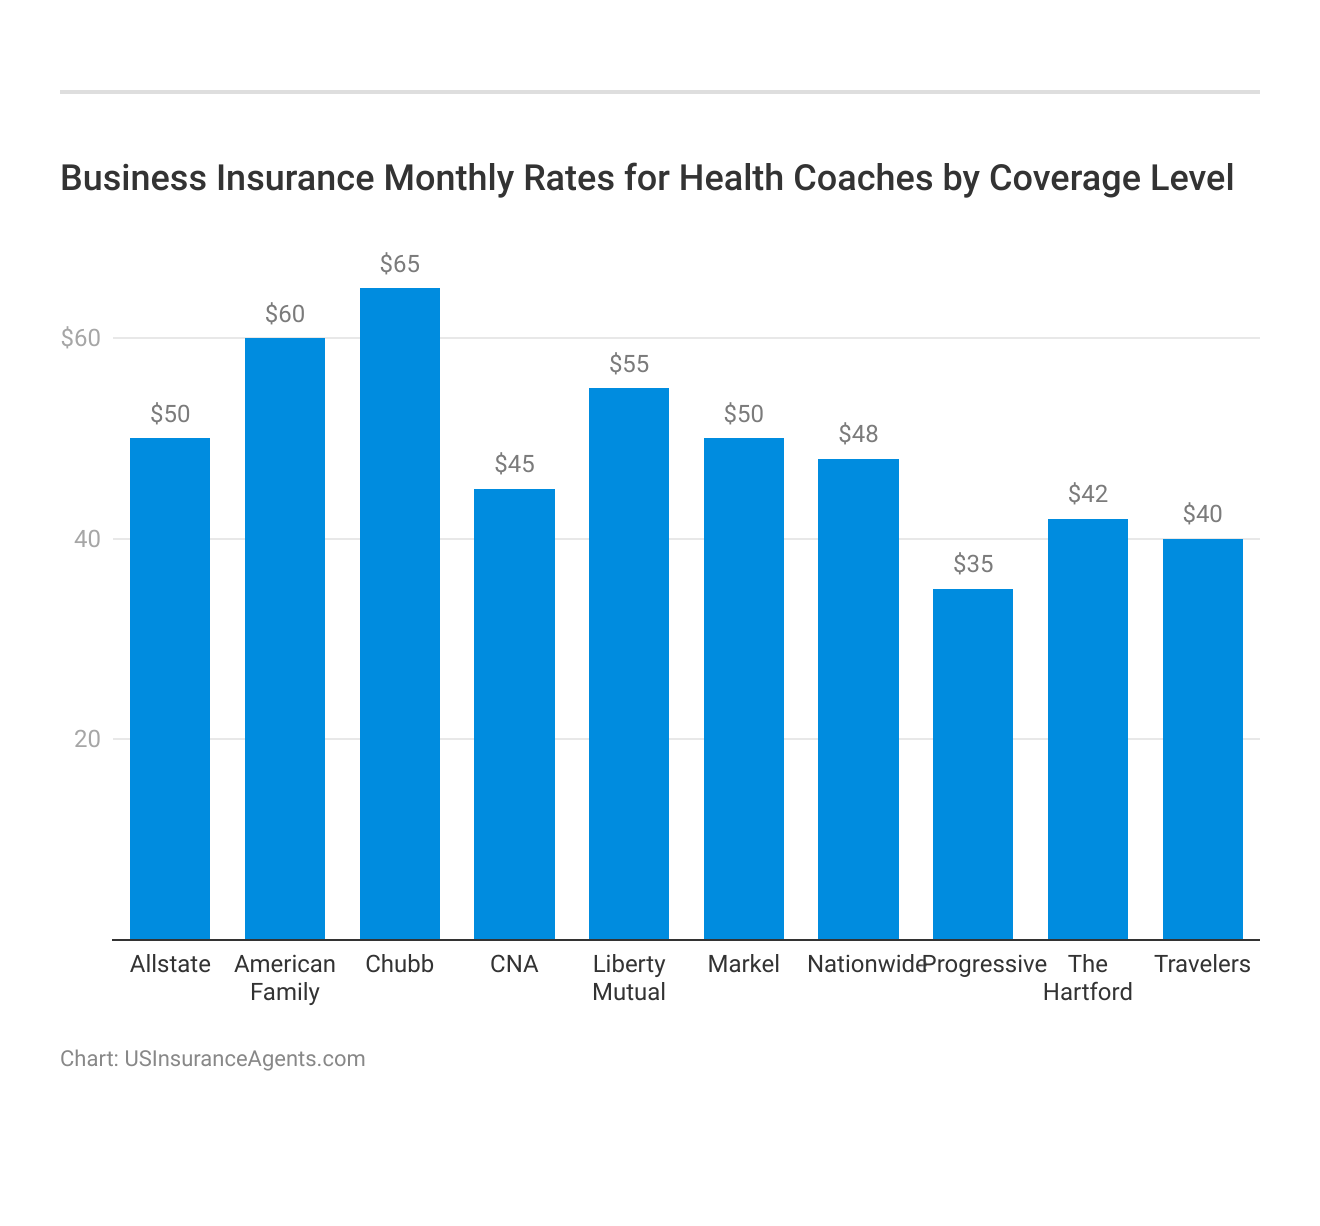 <h3>Business Insurance Monthly Rates for Health Coaches by Coverage Level</h3>